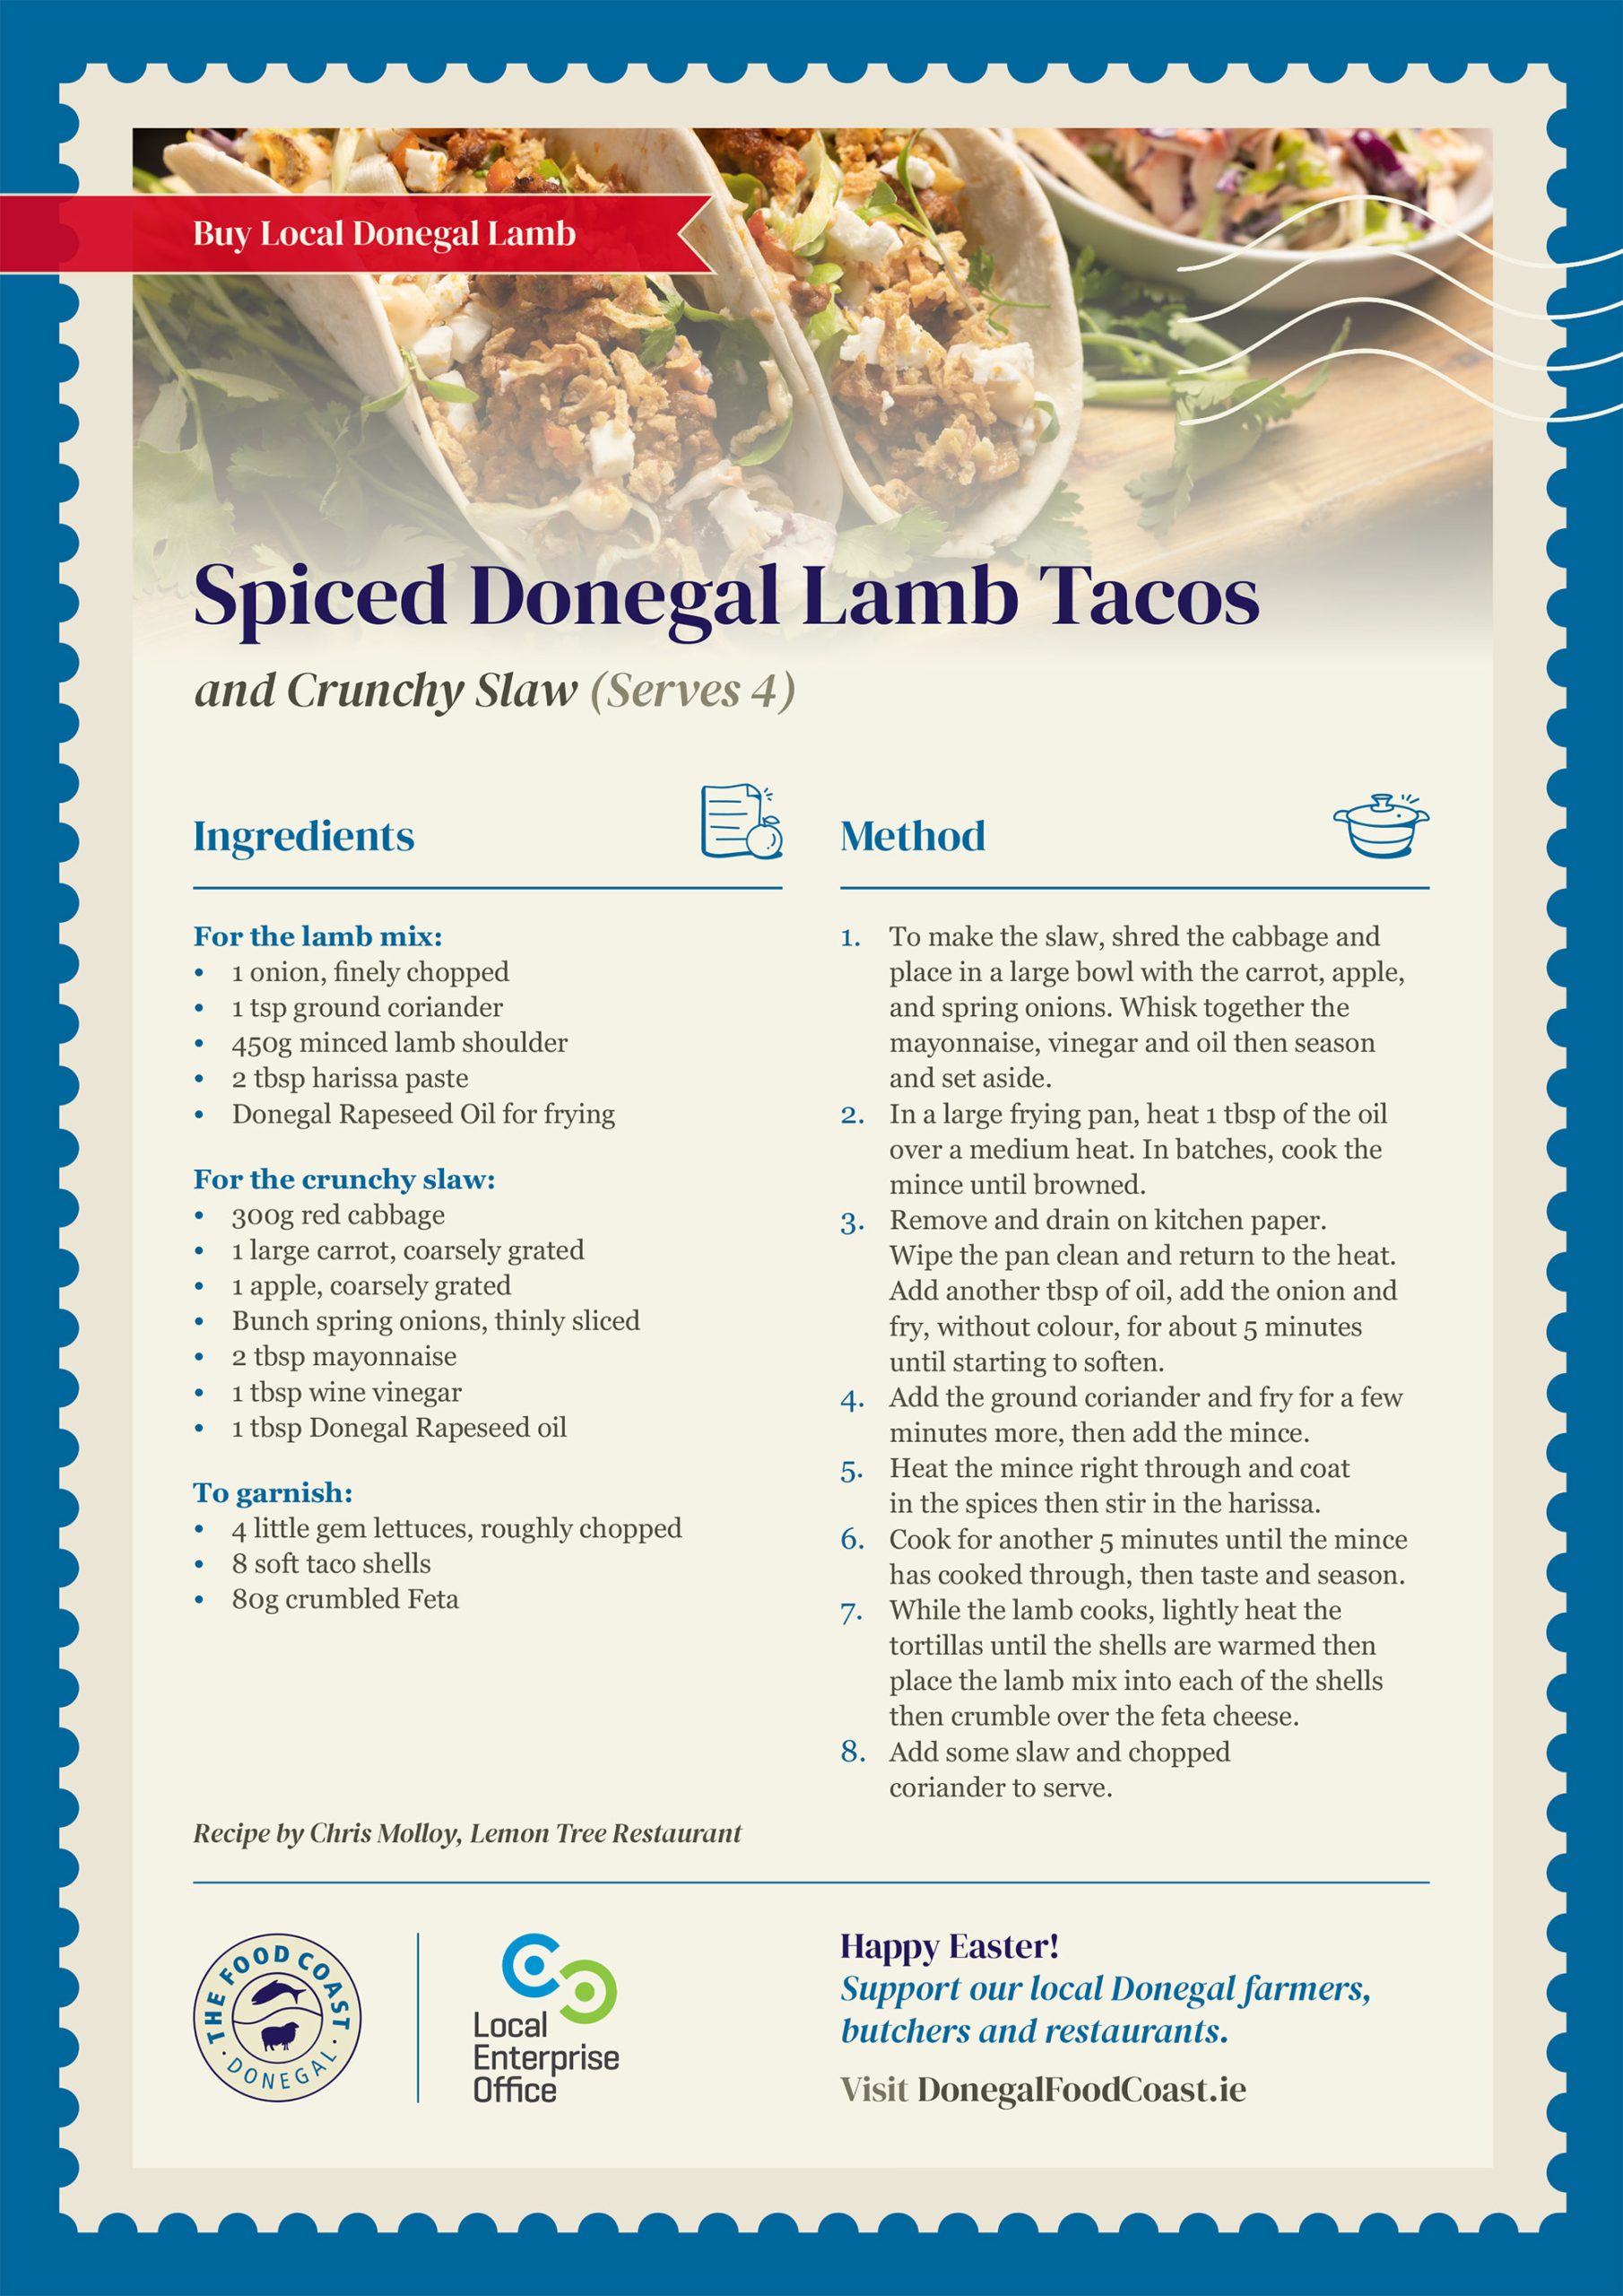 Spiced Donegal Lamb Tacos and Crunchy Slaw